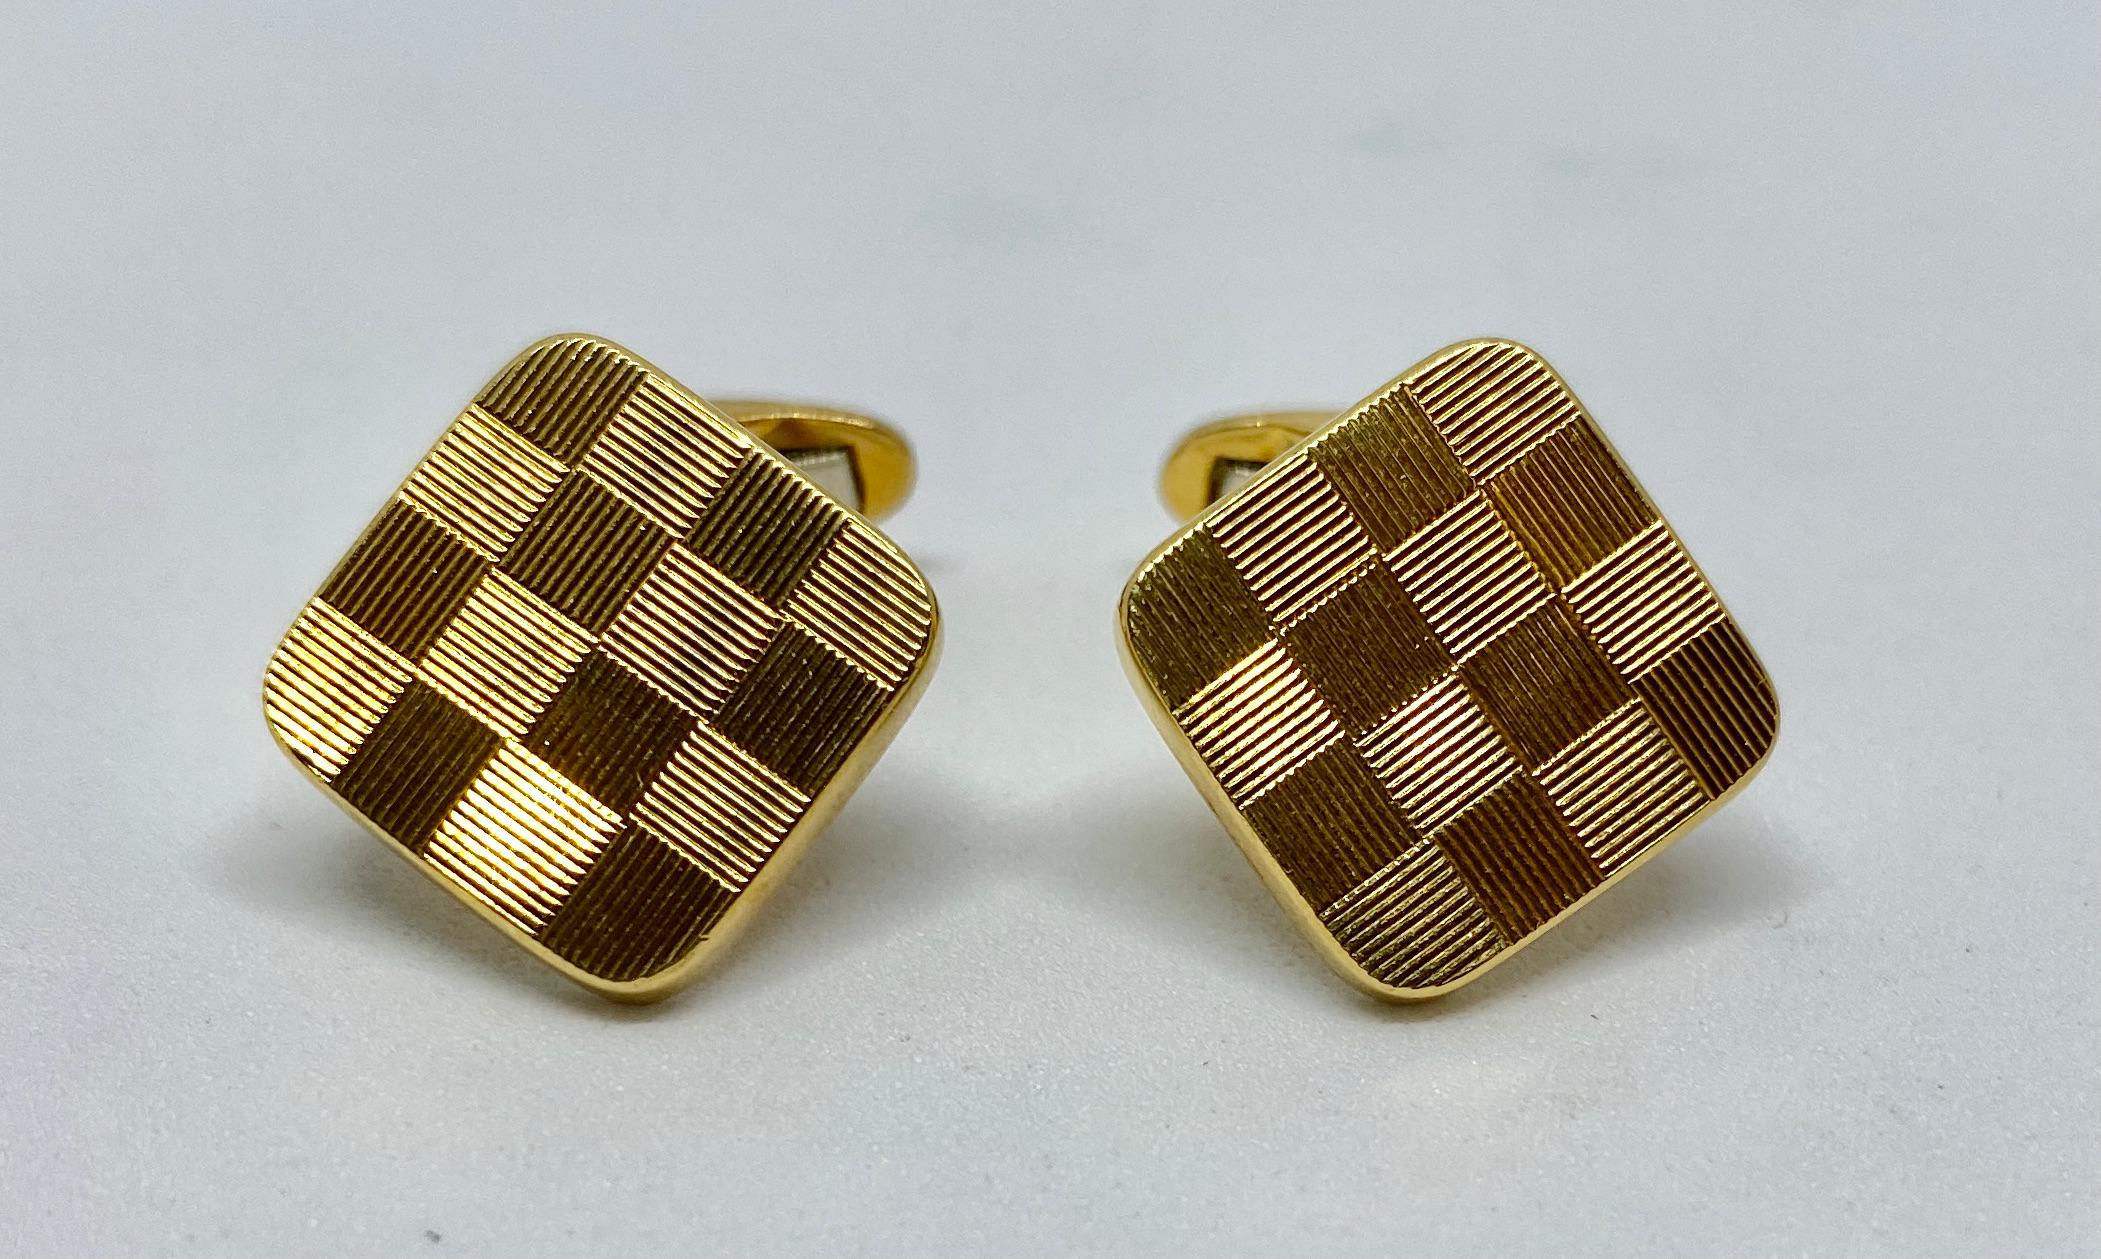 A classic checkerboard design beautifully rendered for Asprey in 18K yellow gold.

The cufflink faces measure 14.1mm square and feature oval-shaped toggle backs. The backs have a nice, firm snap to them. Together the cufflinks weigh just over 12